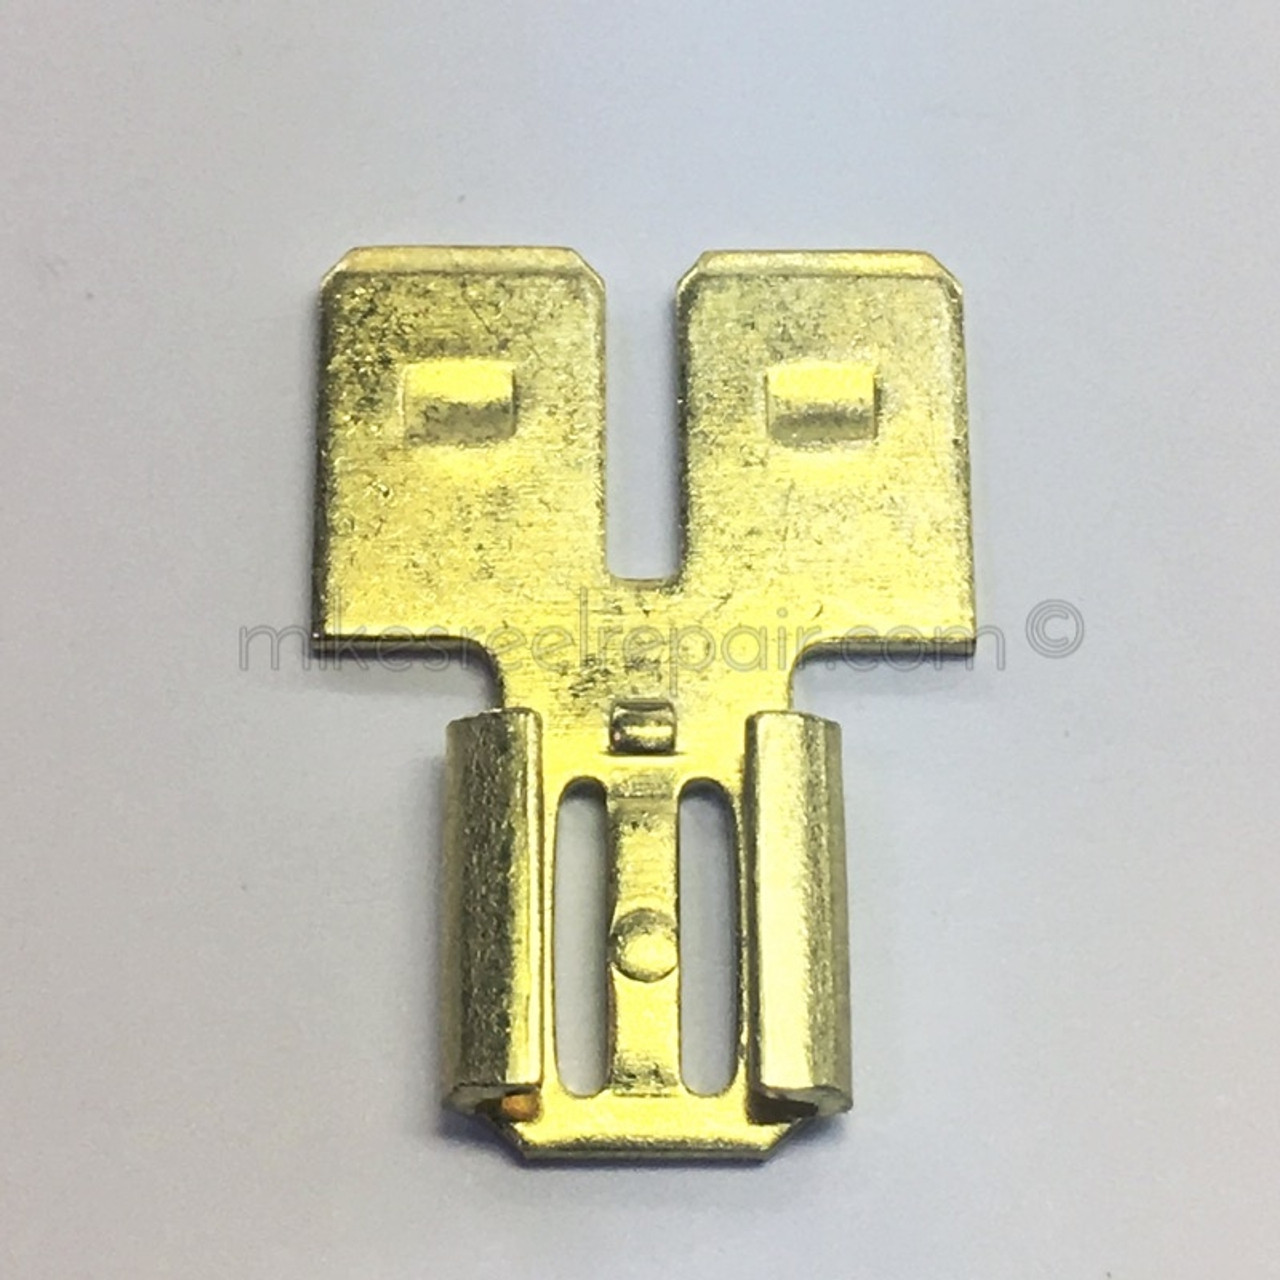 Scotty Y-connector for Relay